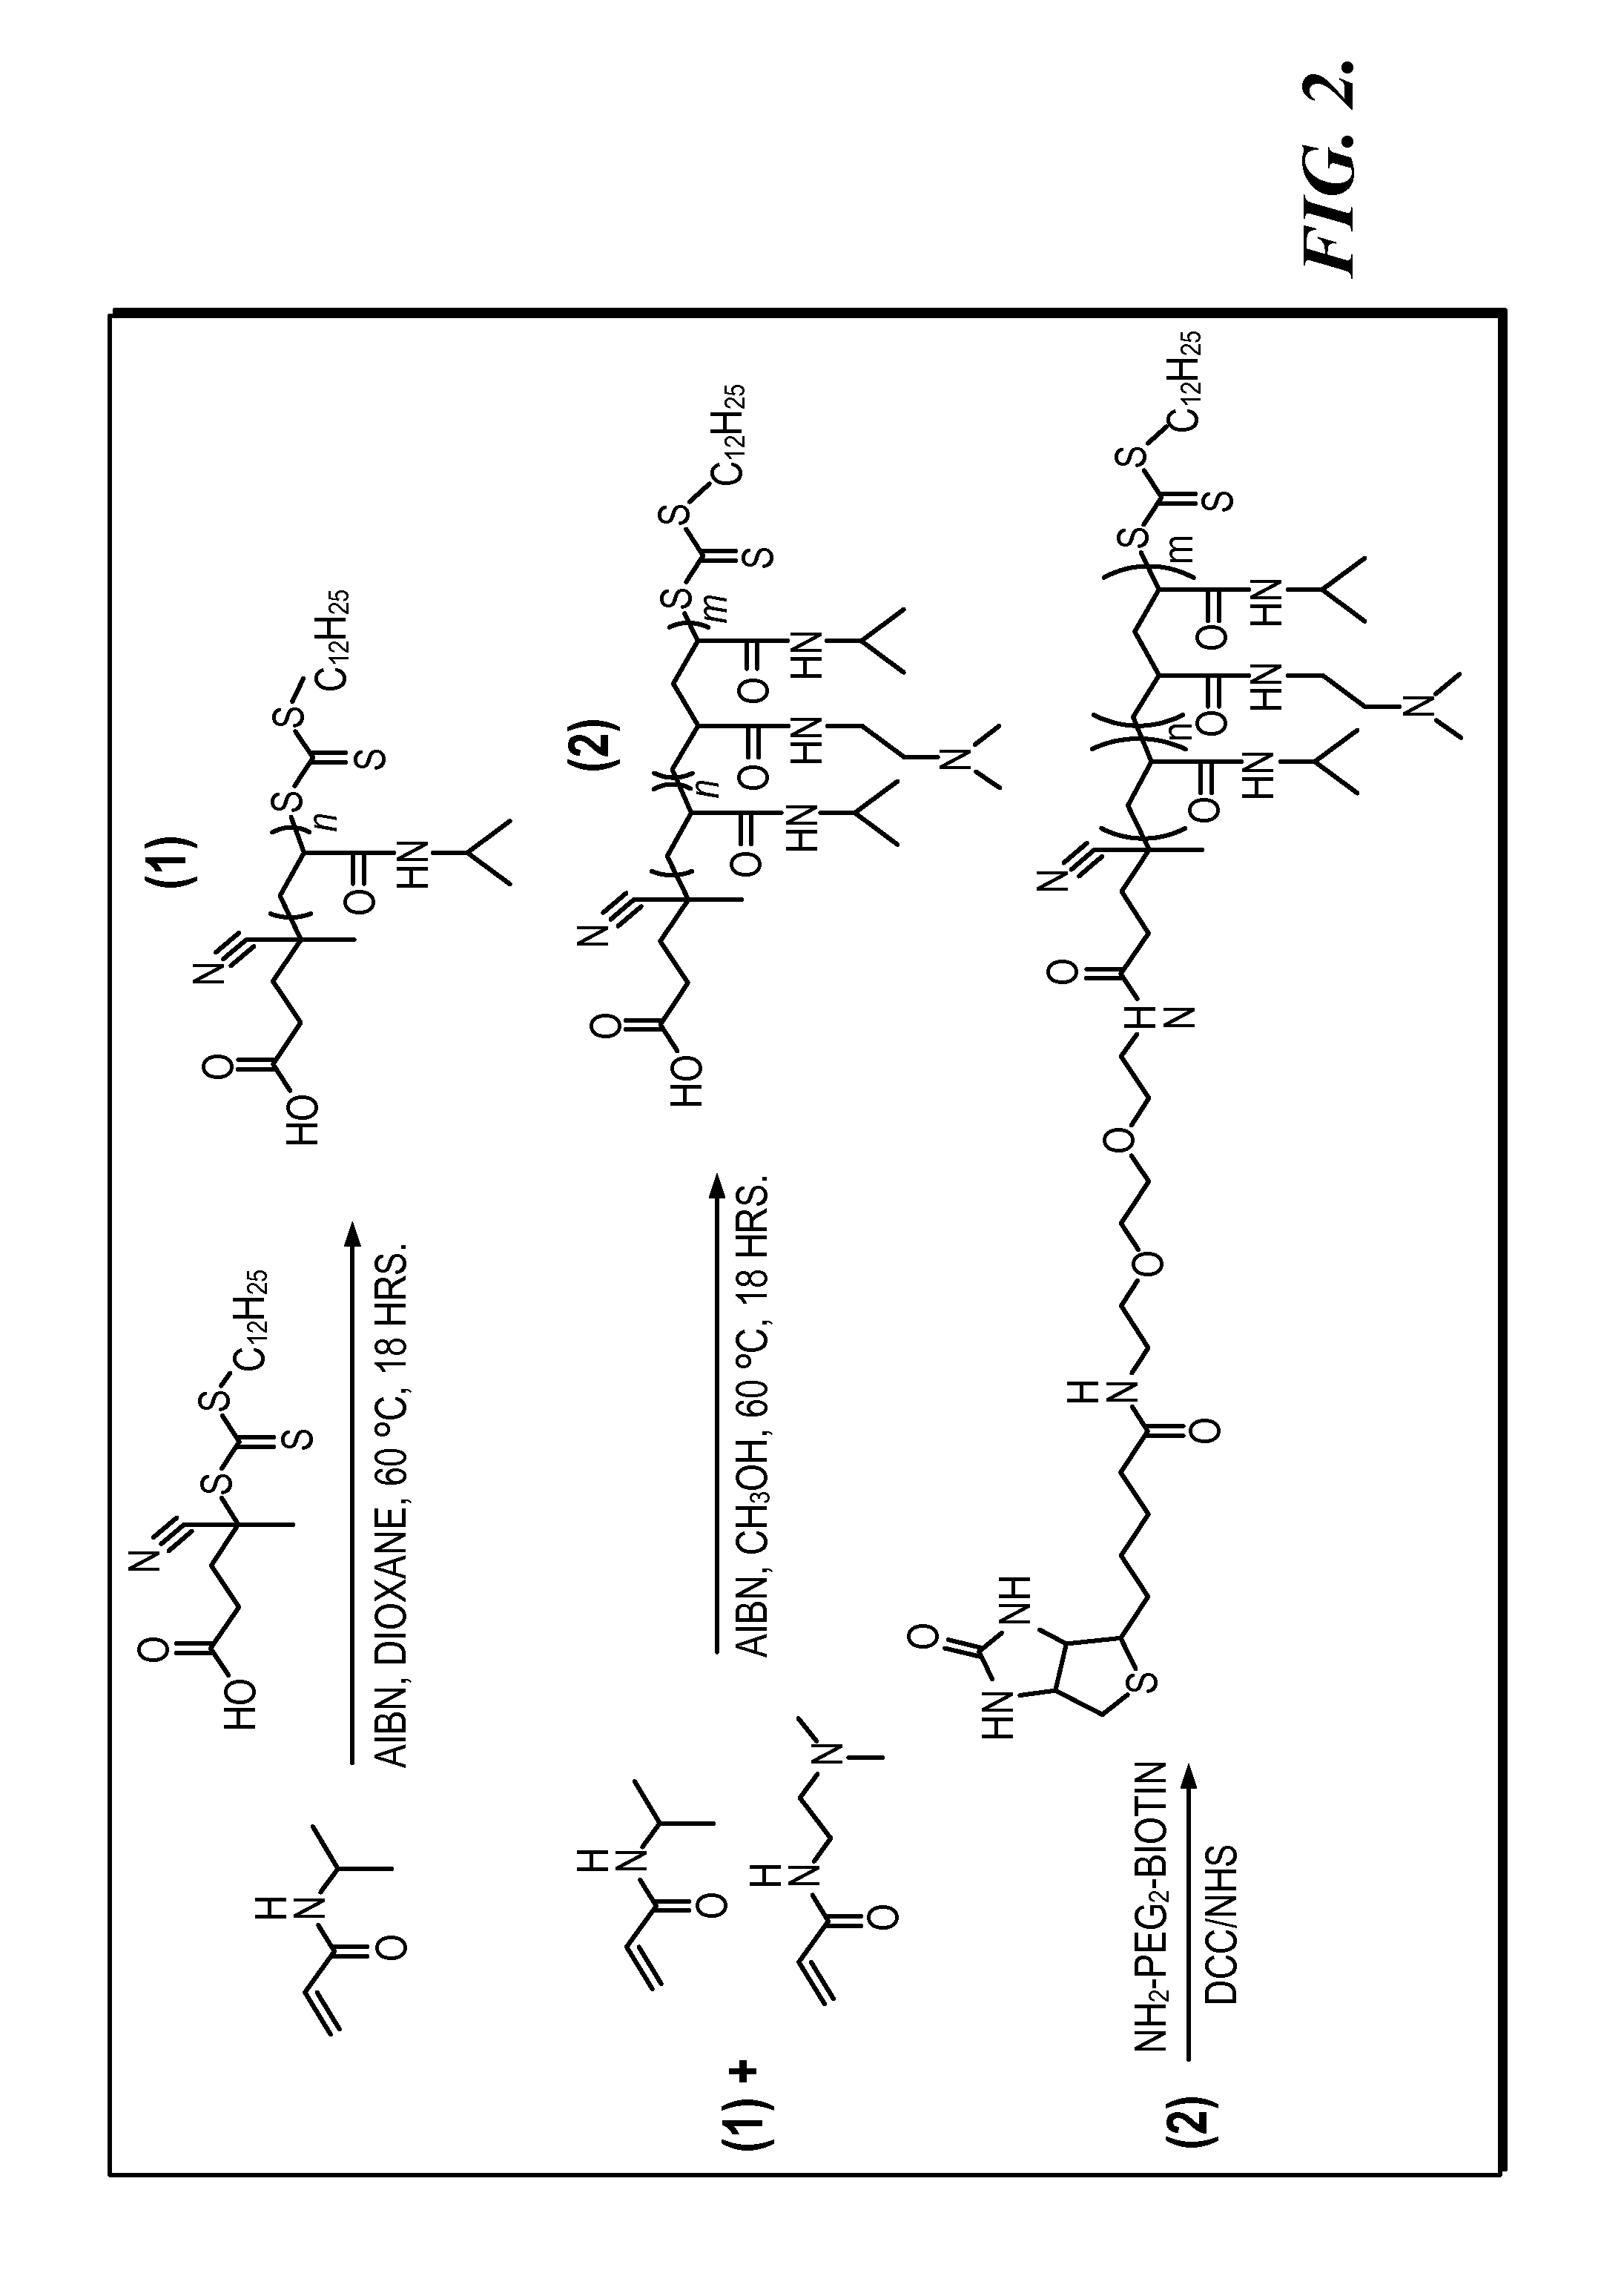 System and method for magnetically concentrating and detecting biomarkers